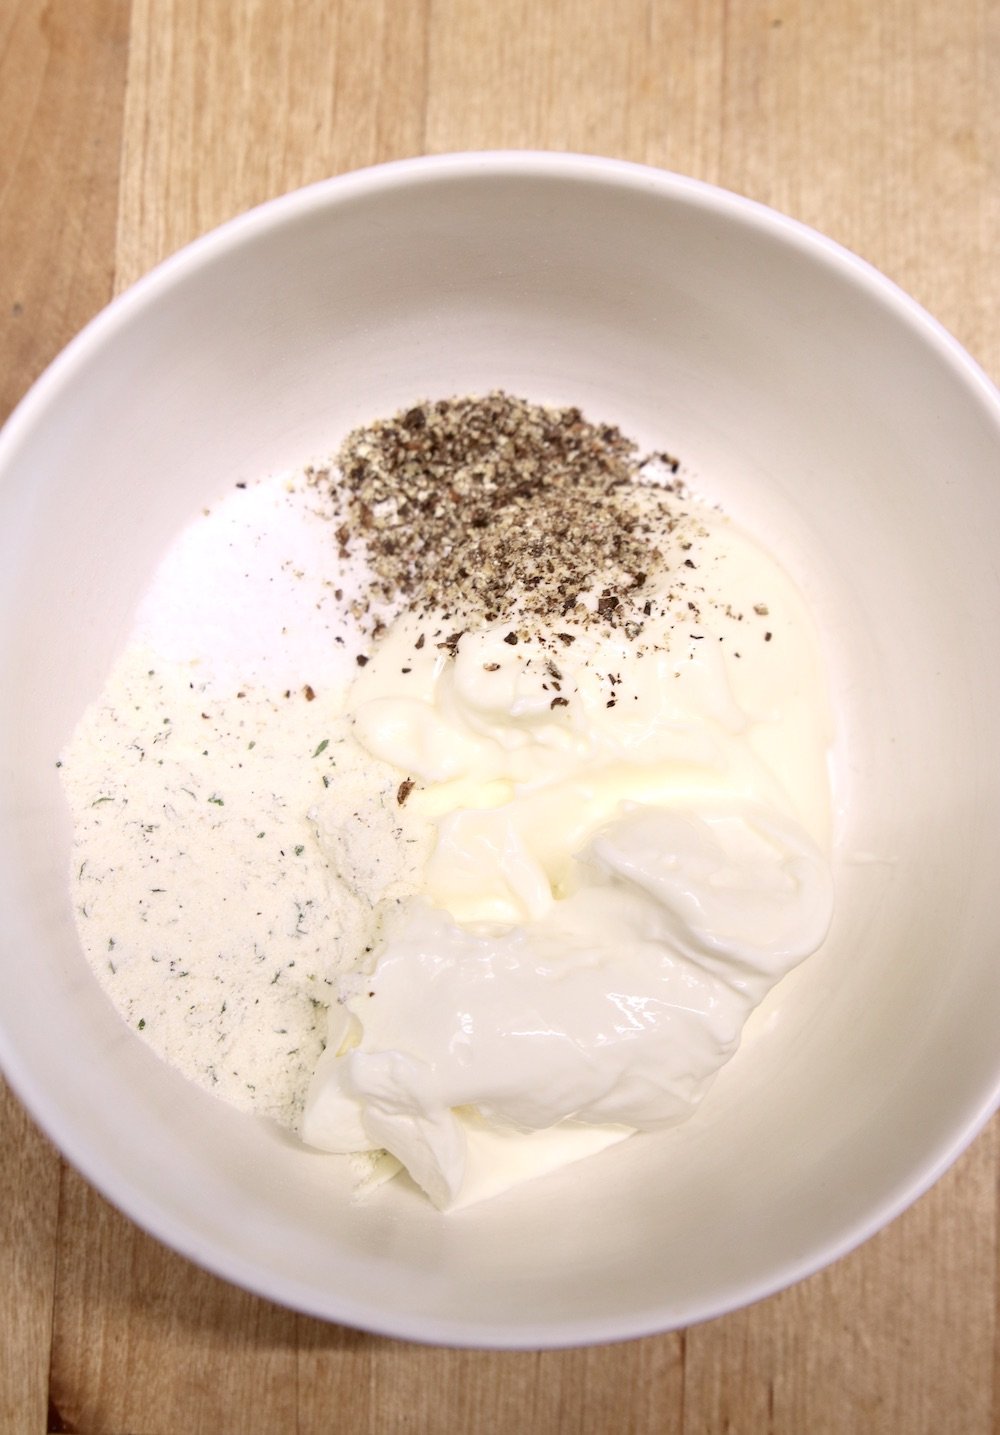 mayo, sour cream, salt and pepper and seasonings in a bowl